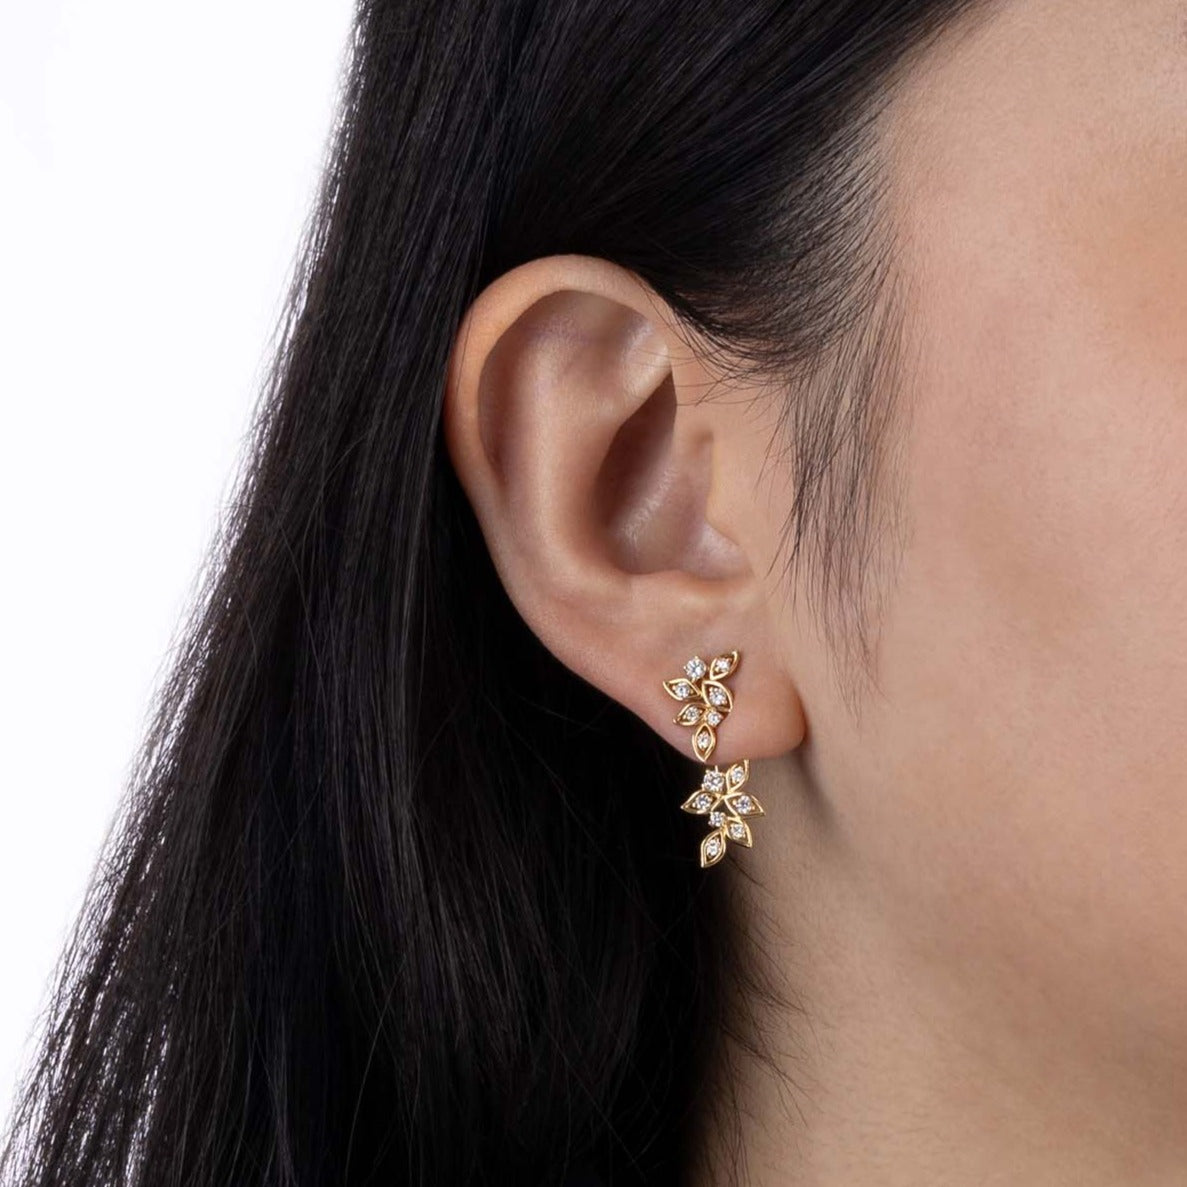 Earrings with Yellow Gold petals and round Diamonds inside them, Small - Model shot